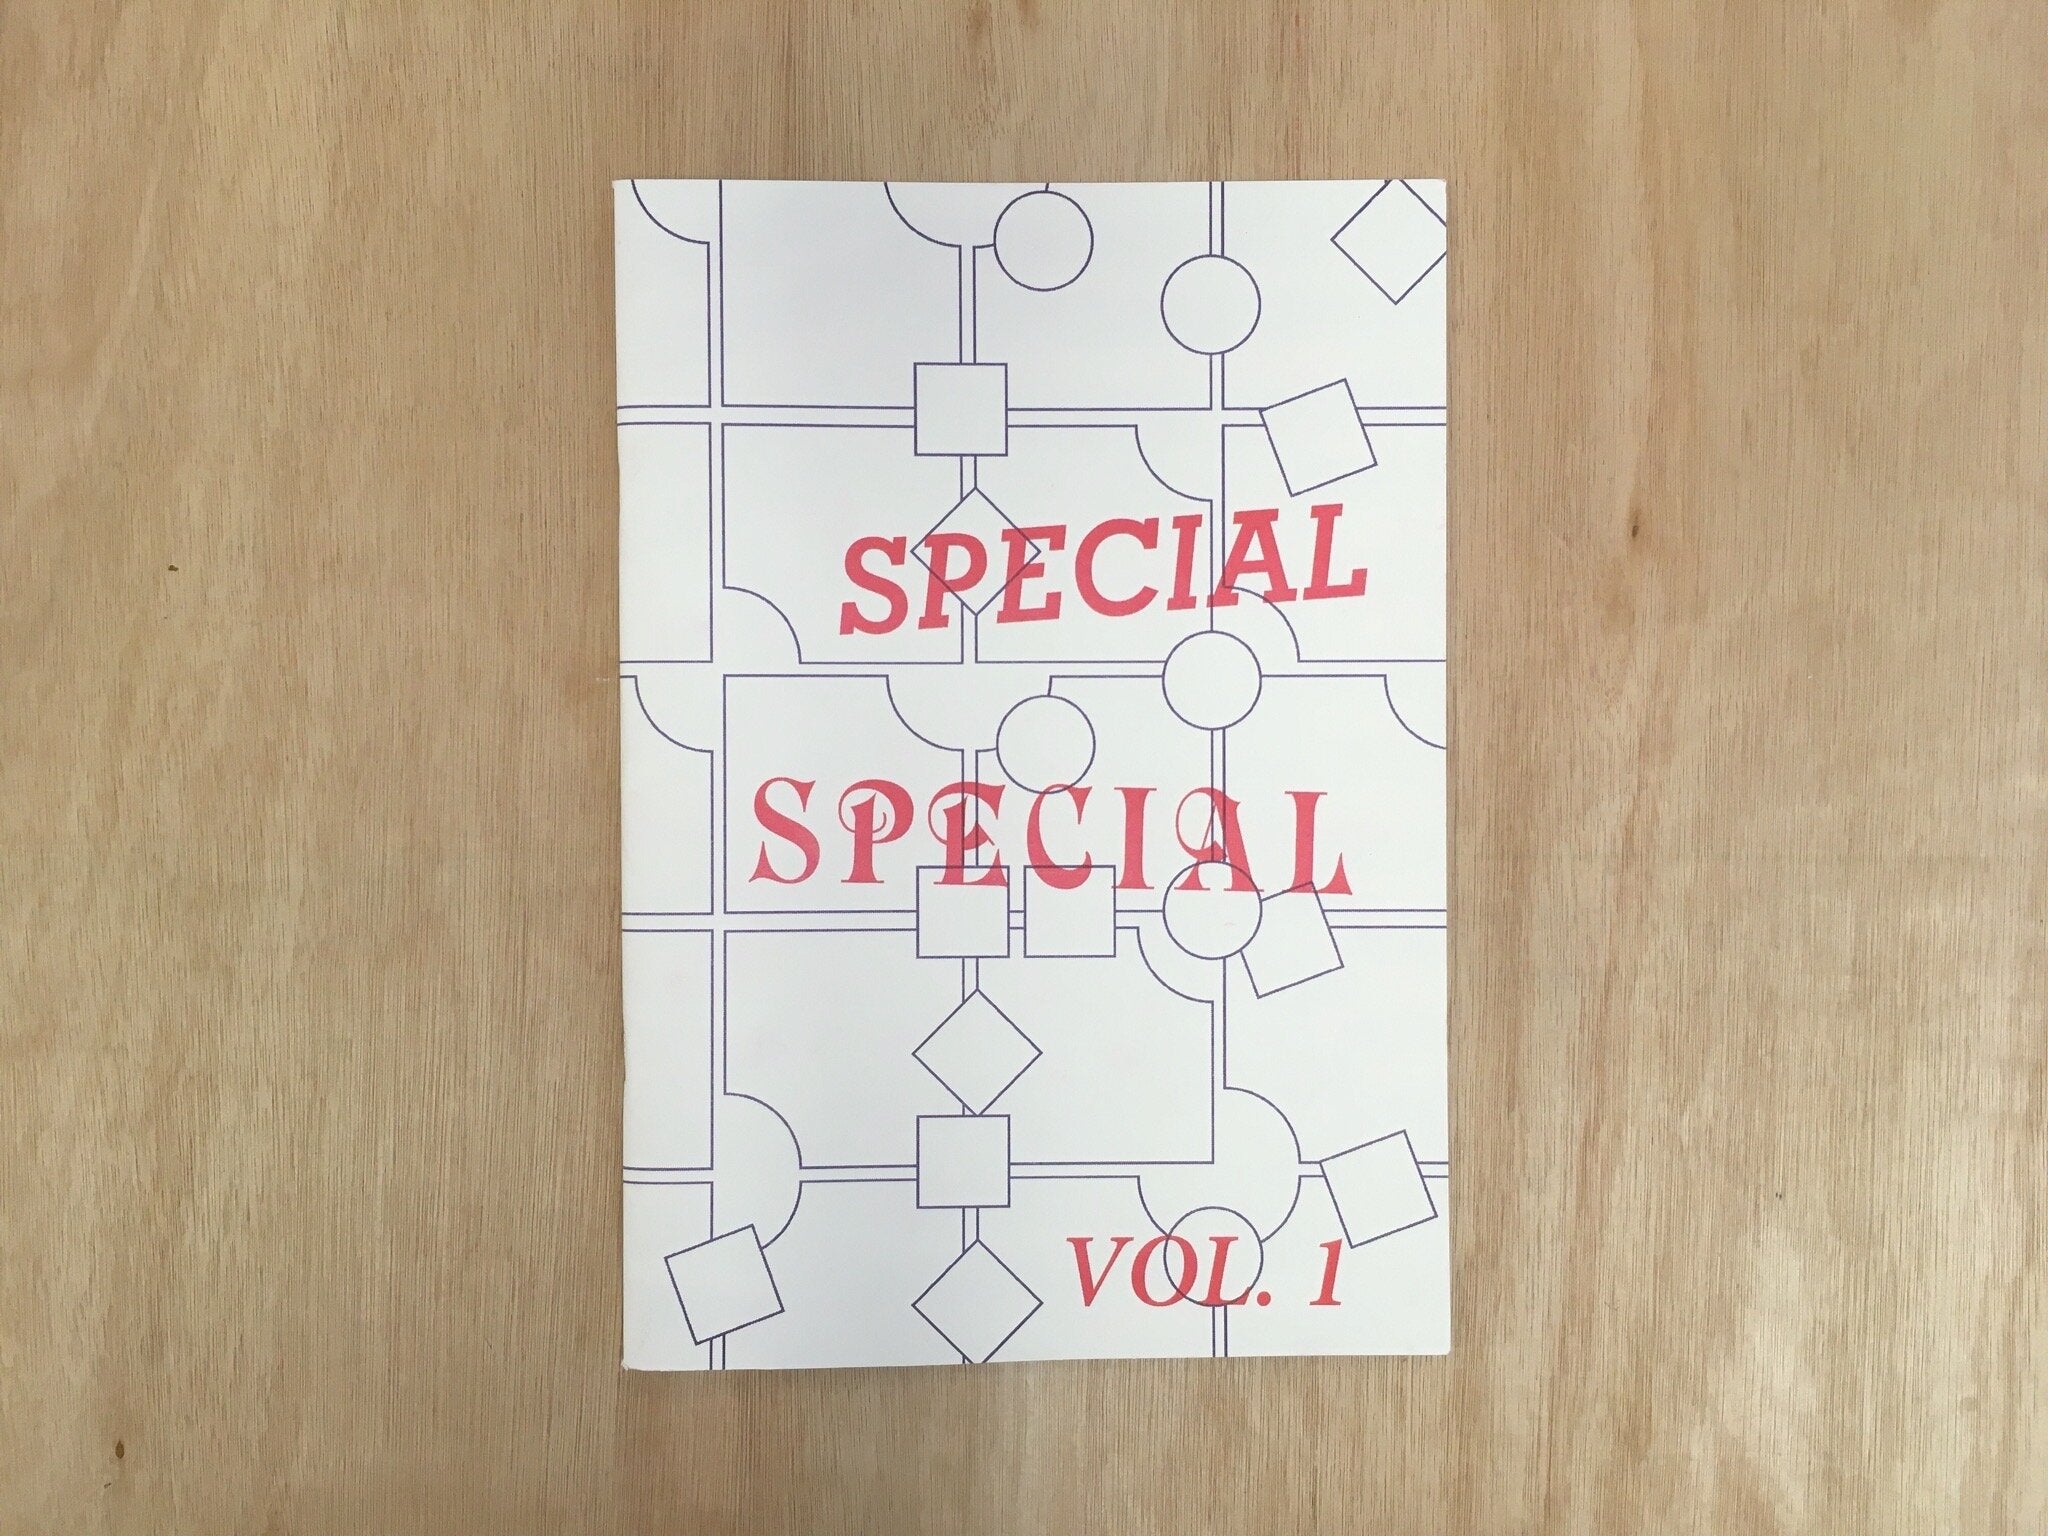 SPECIAL SPECIAL VOL. 1 by Colour Hotel